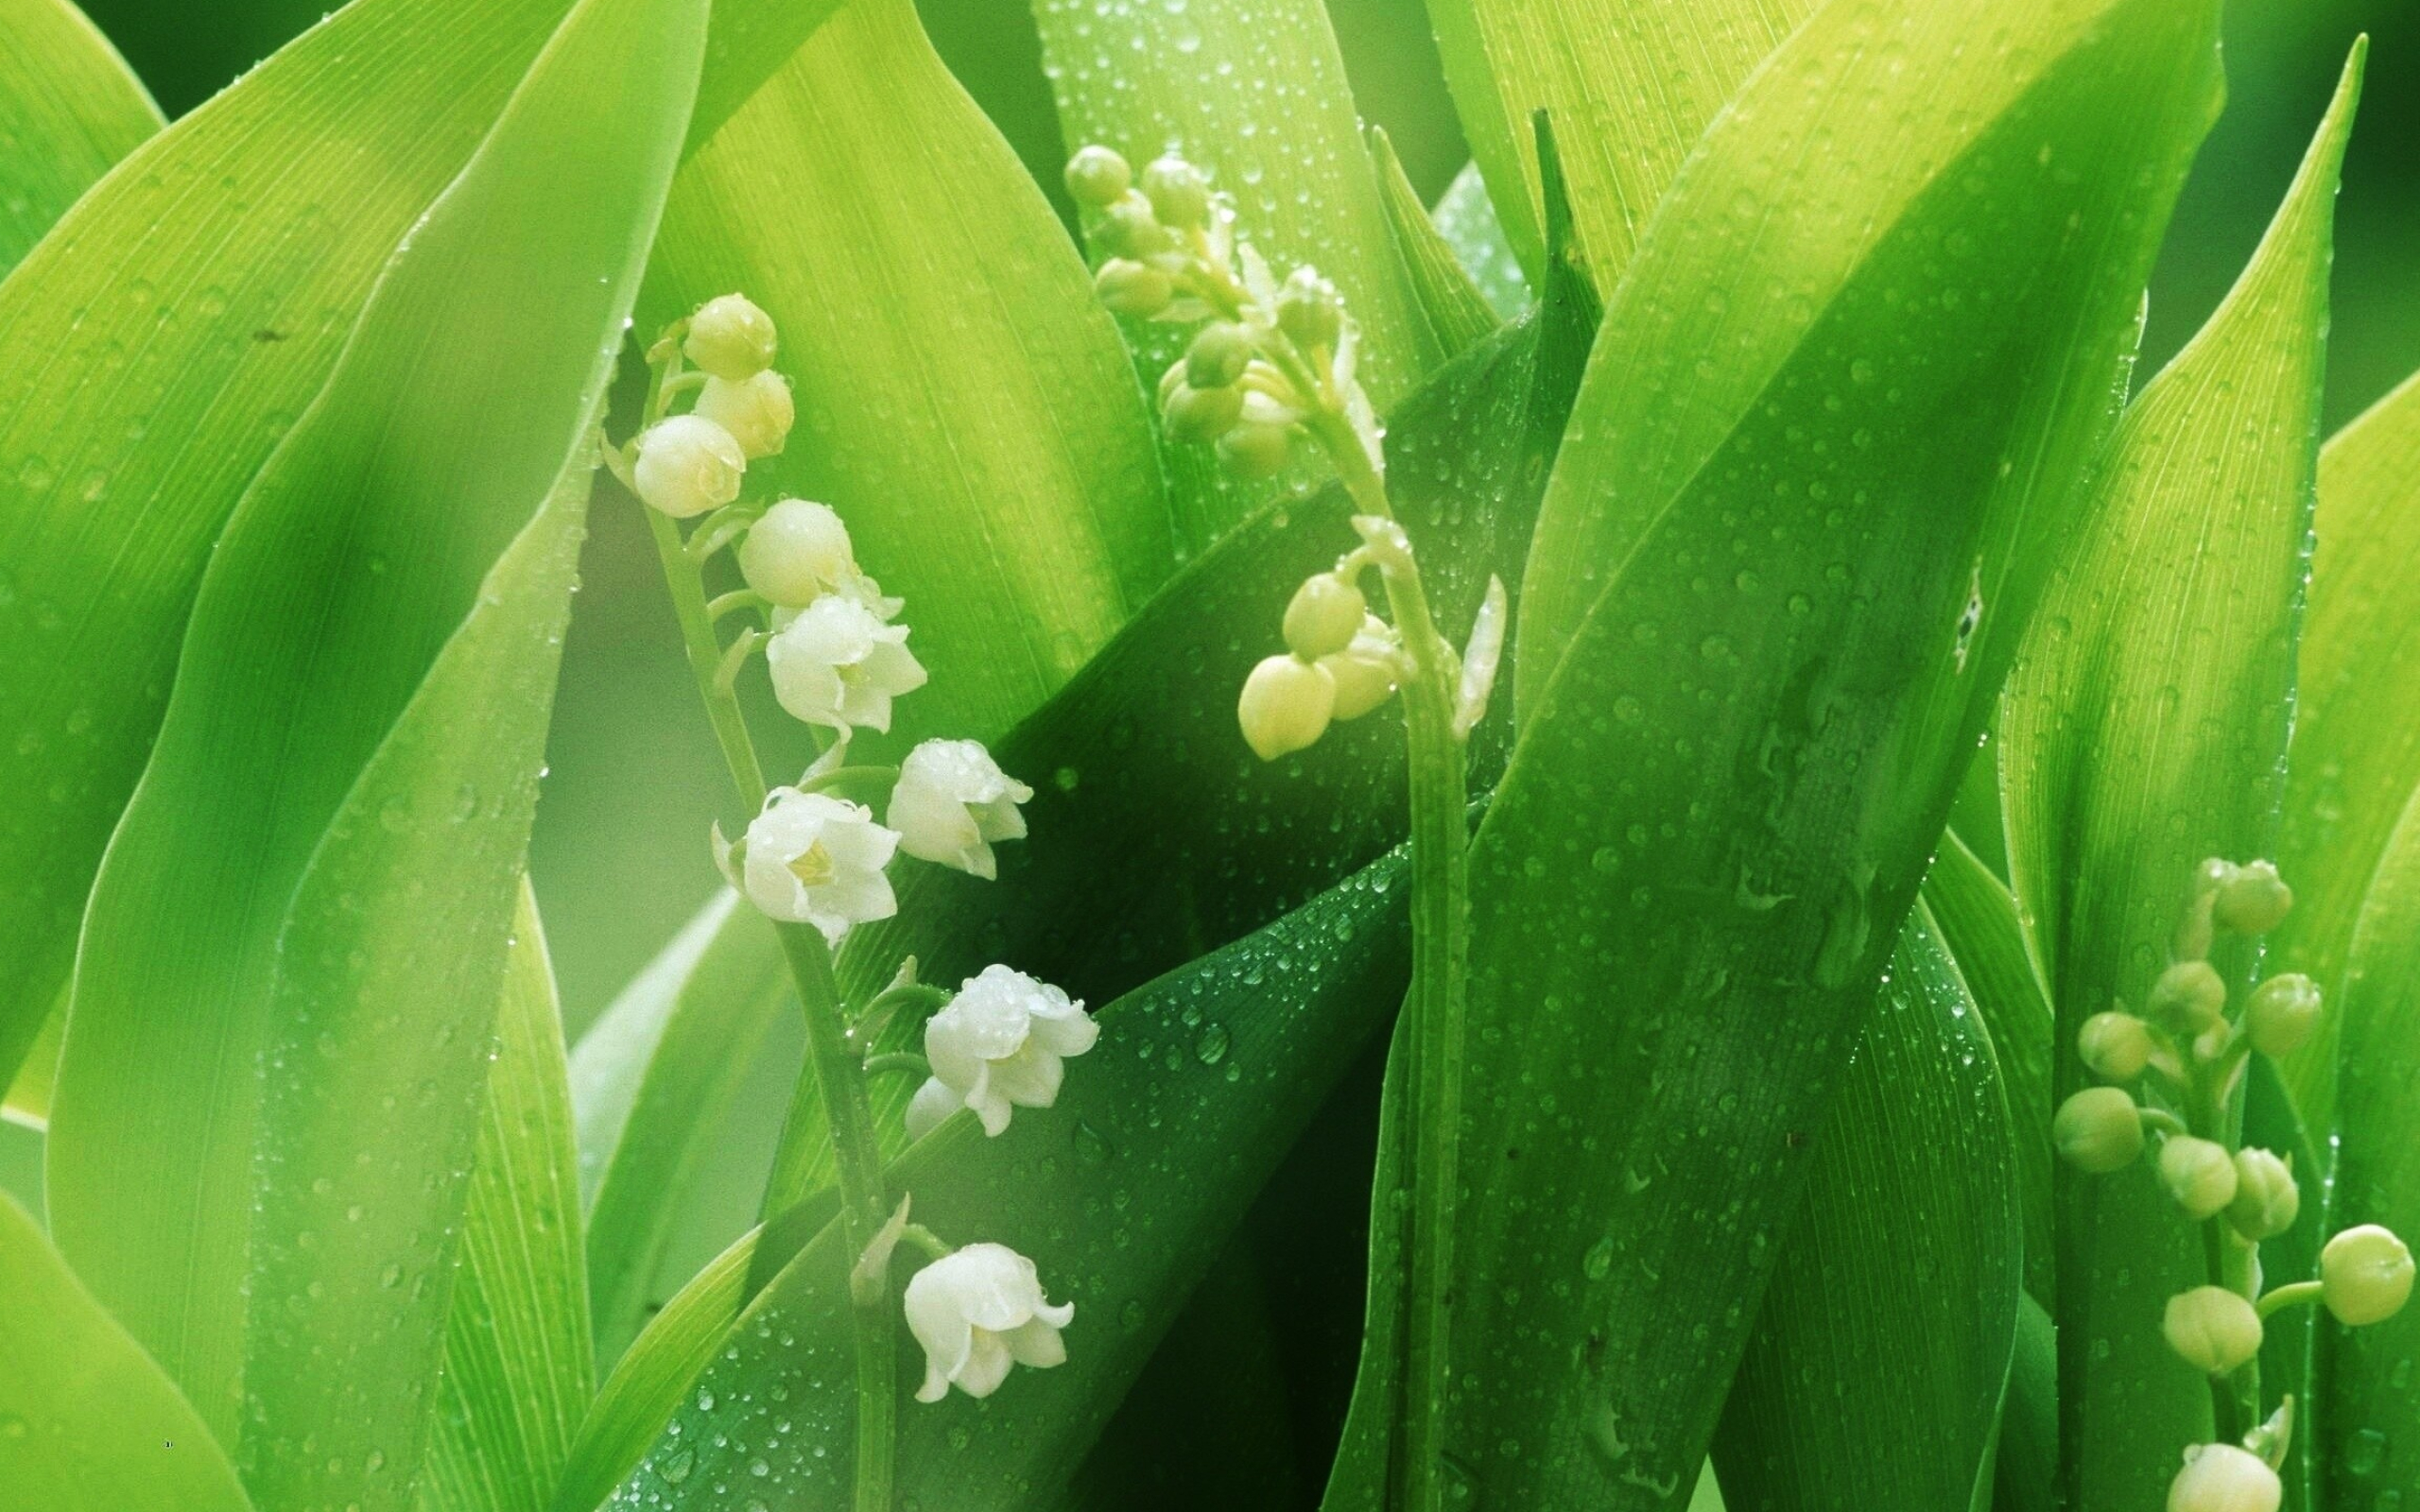 Lily of the Valley: It was featured in the bridal bouquet at the wedding of Prince William and Catherine Middleton, Flowering plant. 2560x1600 HD Wallpaper.